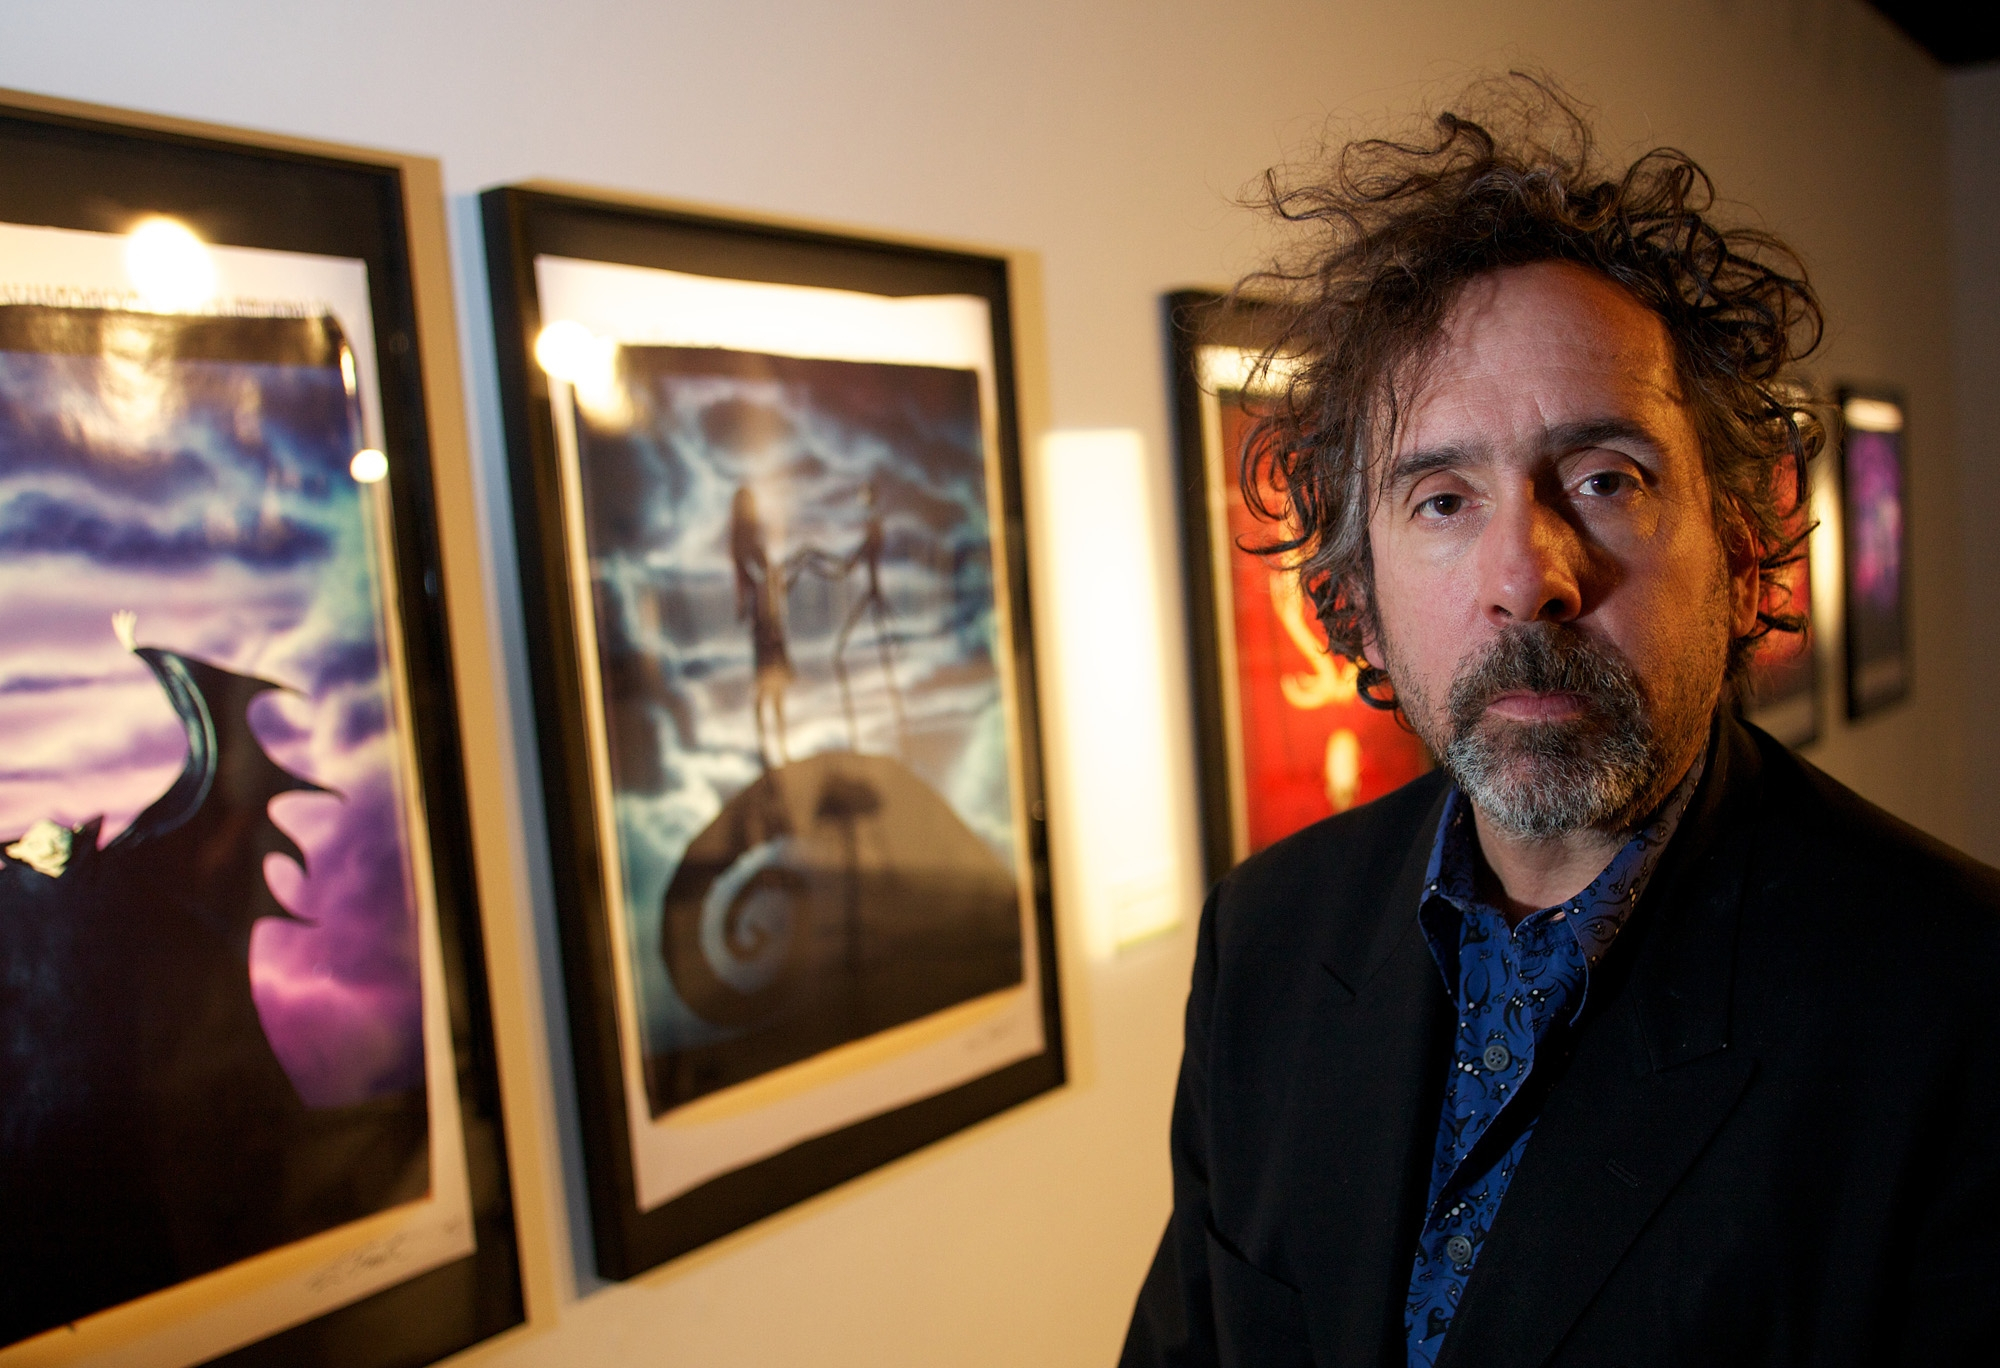 2000x1368 Wallpaper : Tim Burton, paintings, exhibitions, hair, celebrity wallhaven 649592 HD Wallpapers